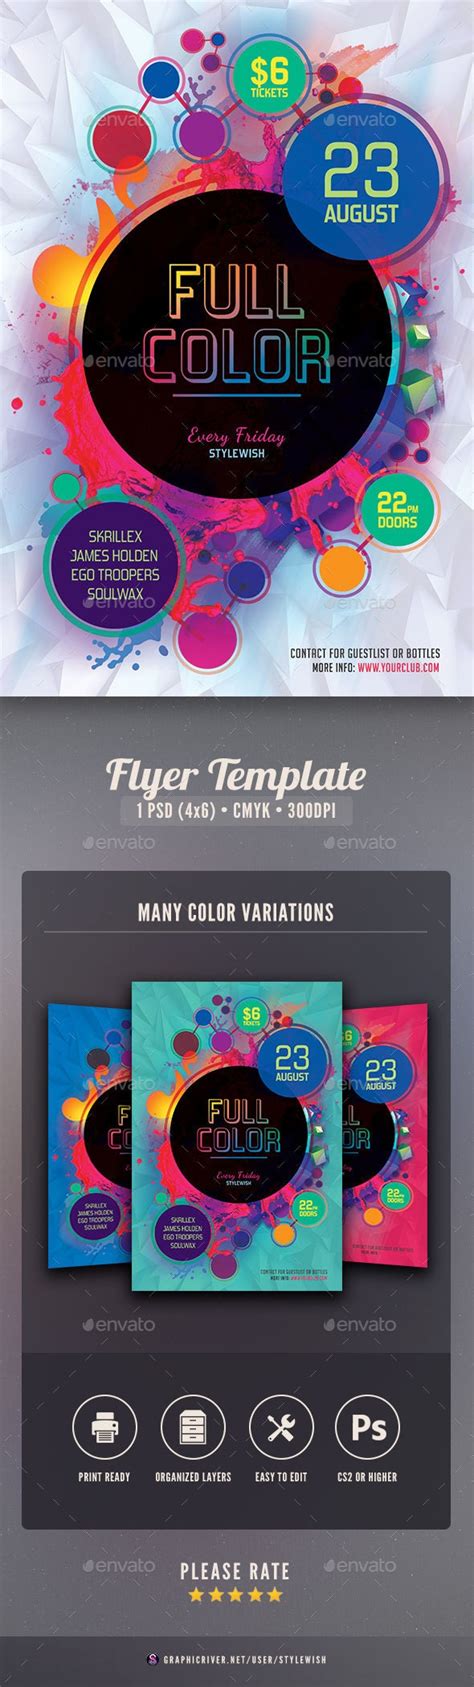 Full Color Flyer Print Templates Graphicriver